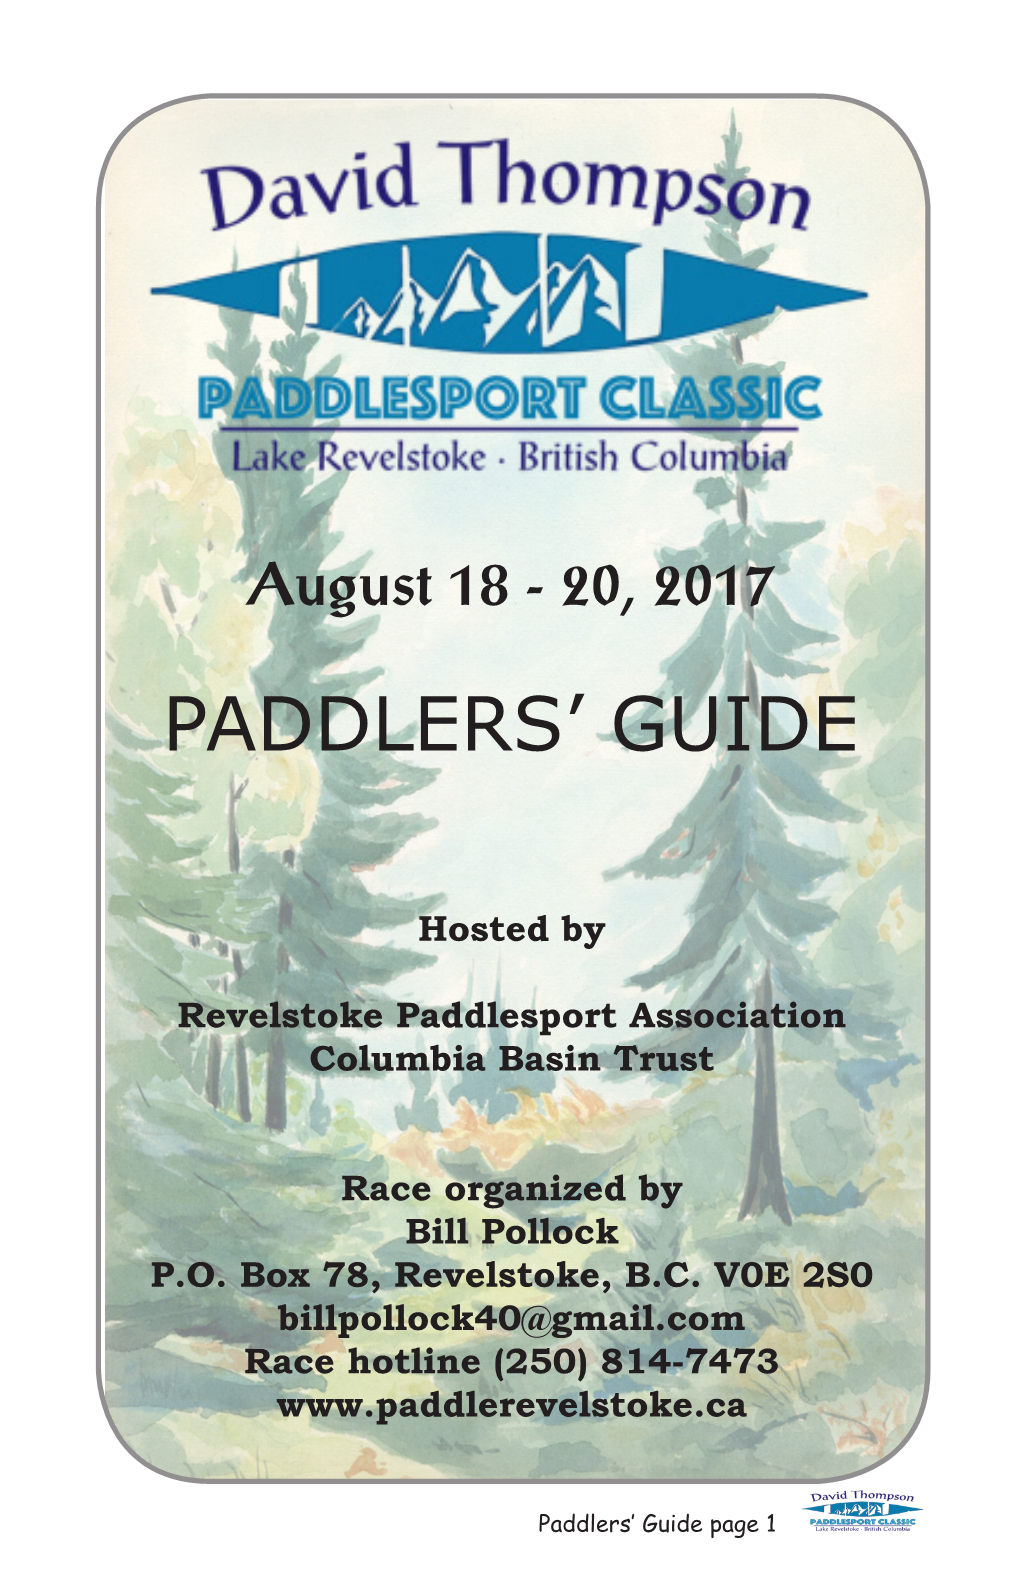 Paddlers' Guide